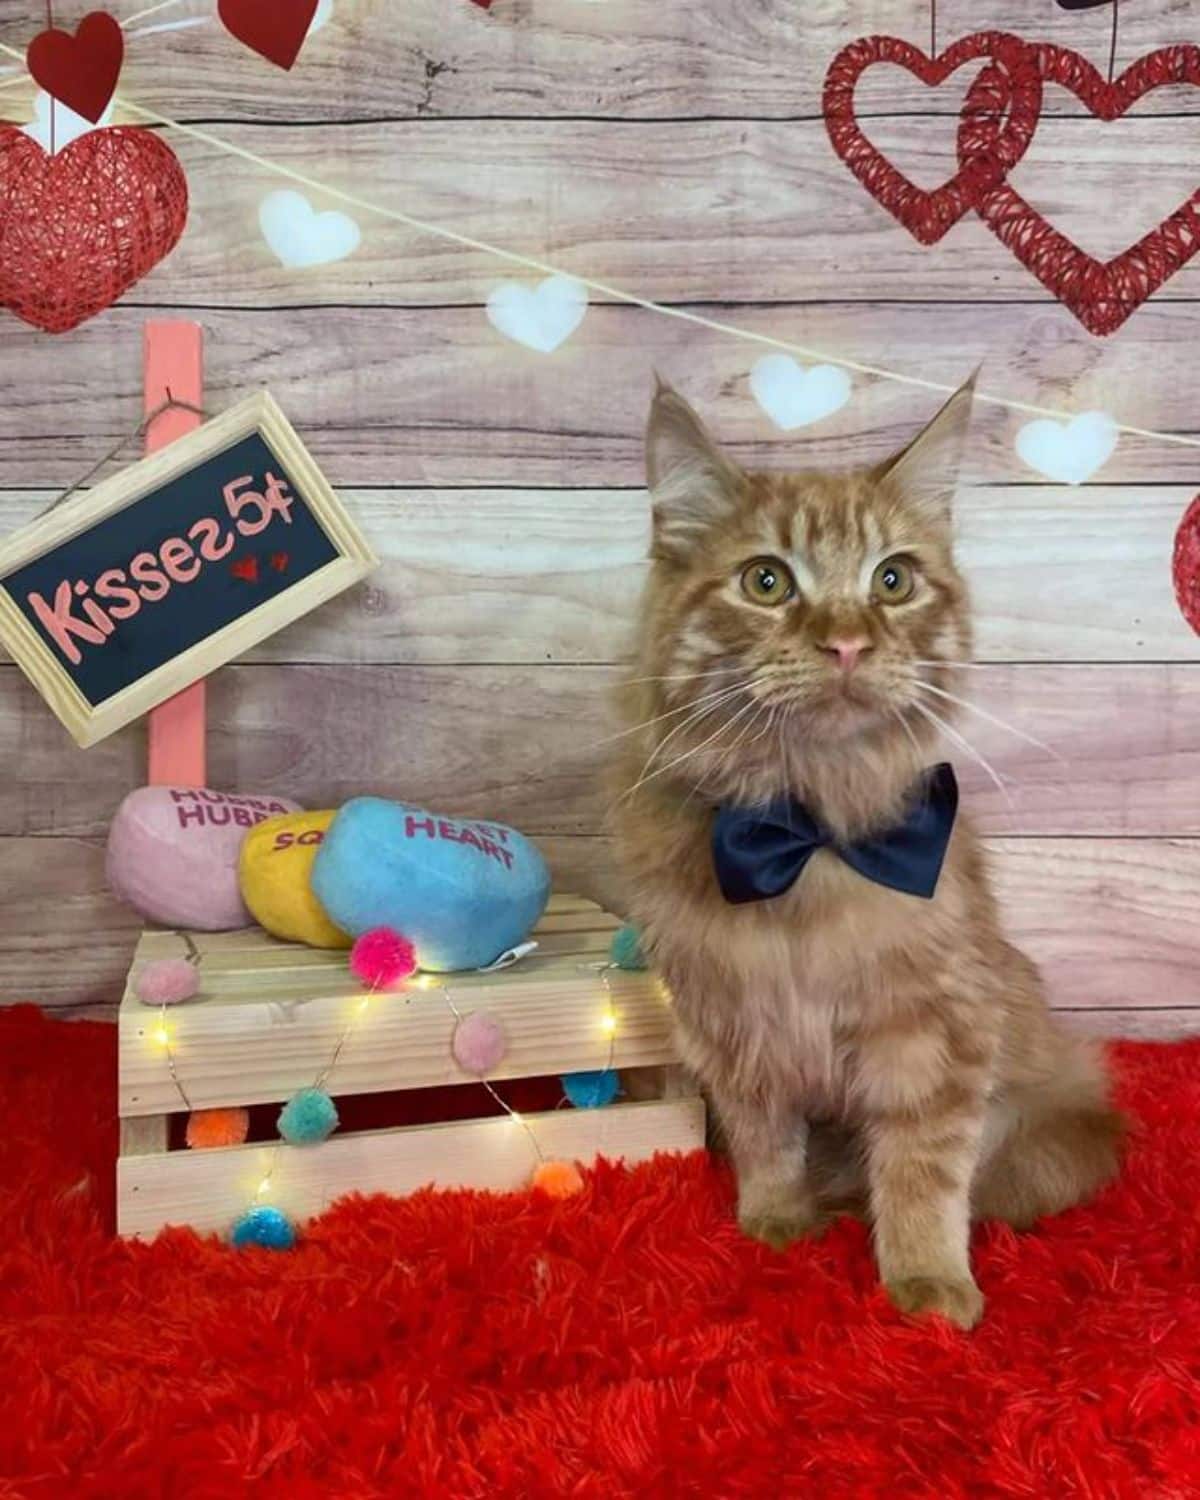 A cute maine coon with a black bowtie sitting on a red carpet.